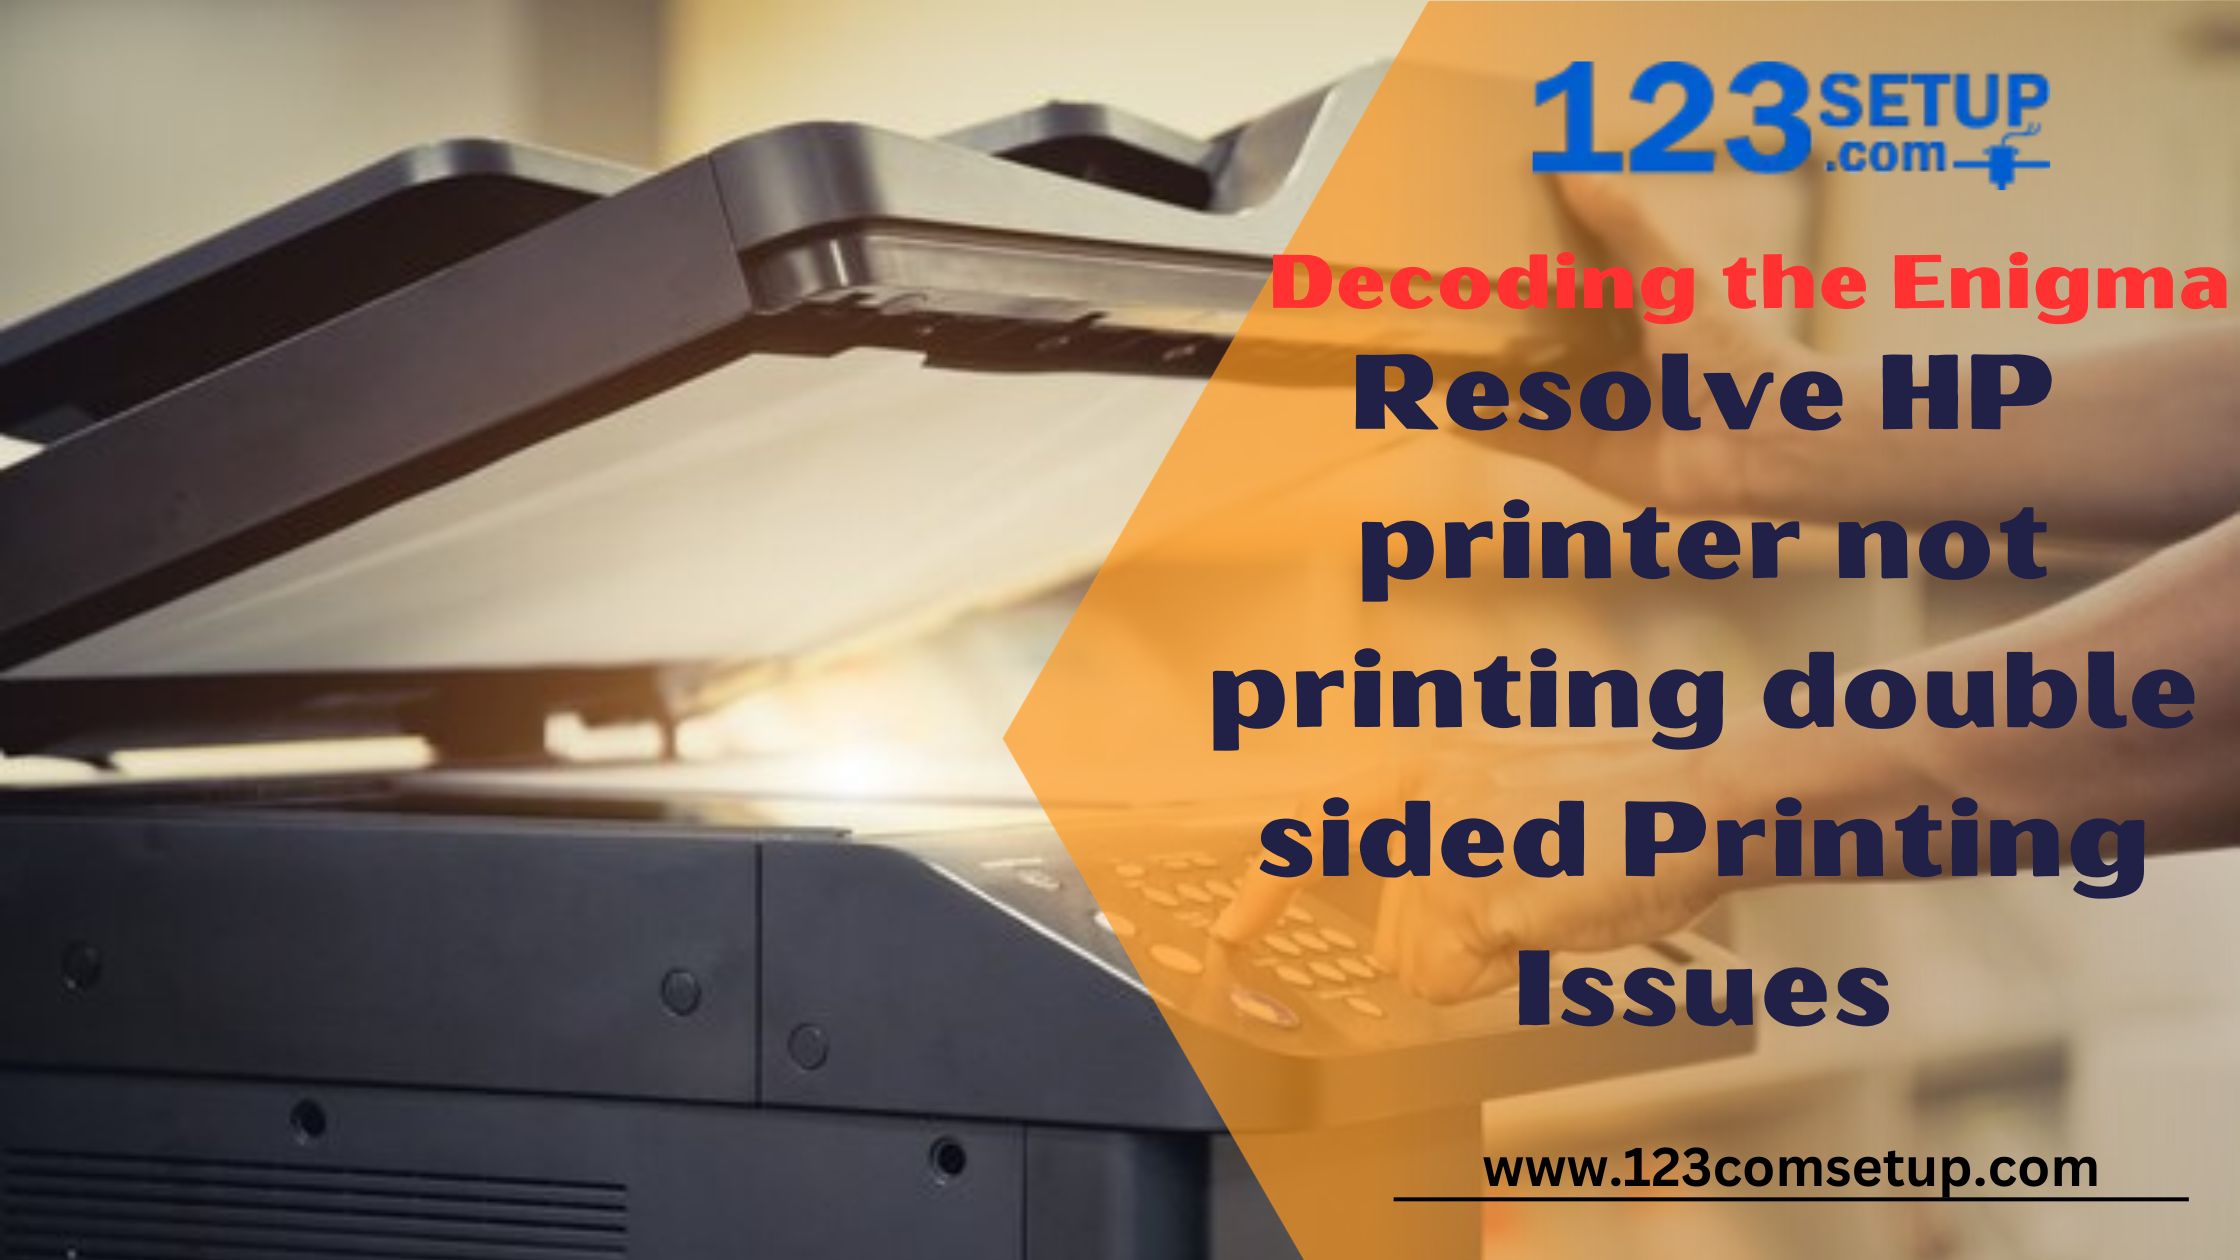 Decoding the Enigma: Resolve HP printer not printing double sided Printing Issues